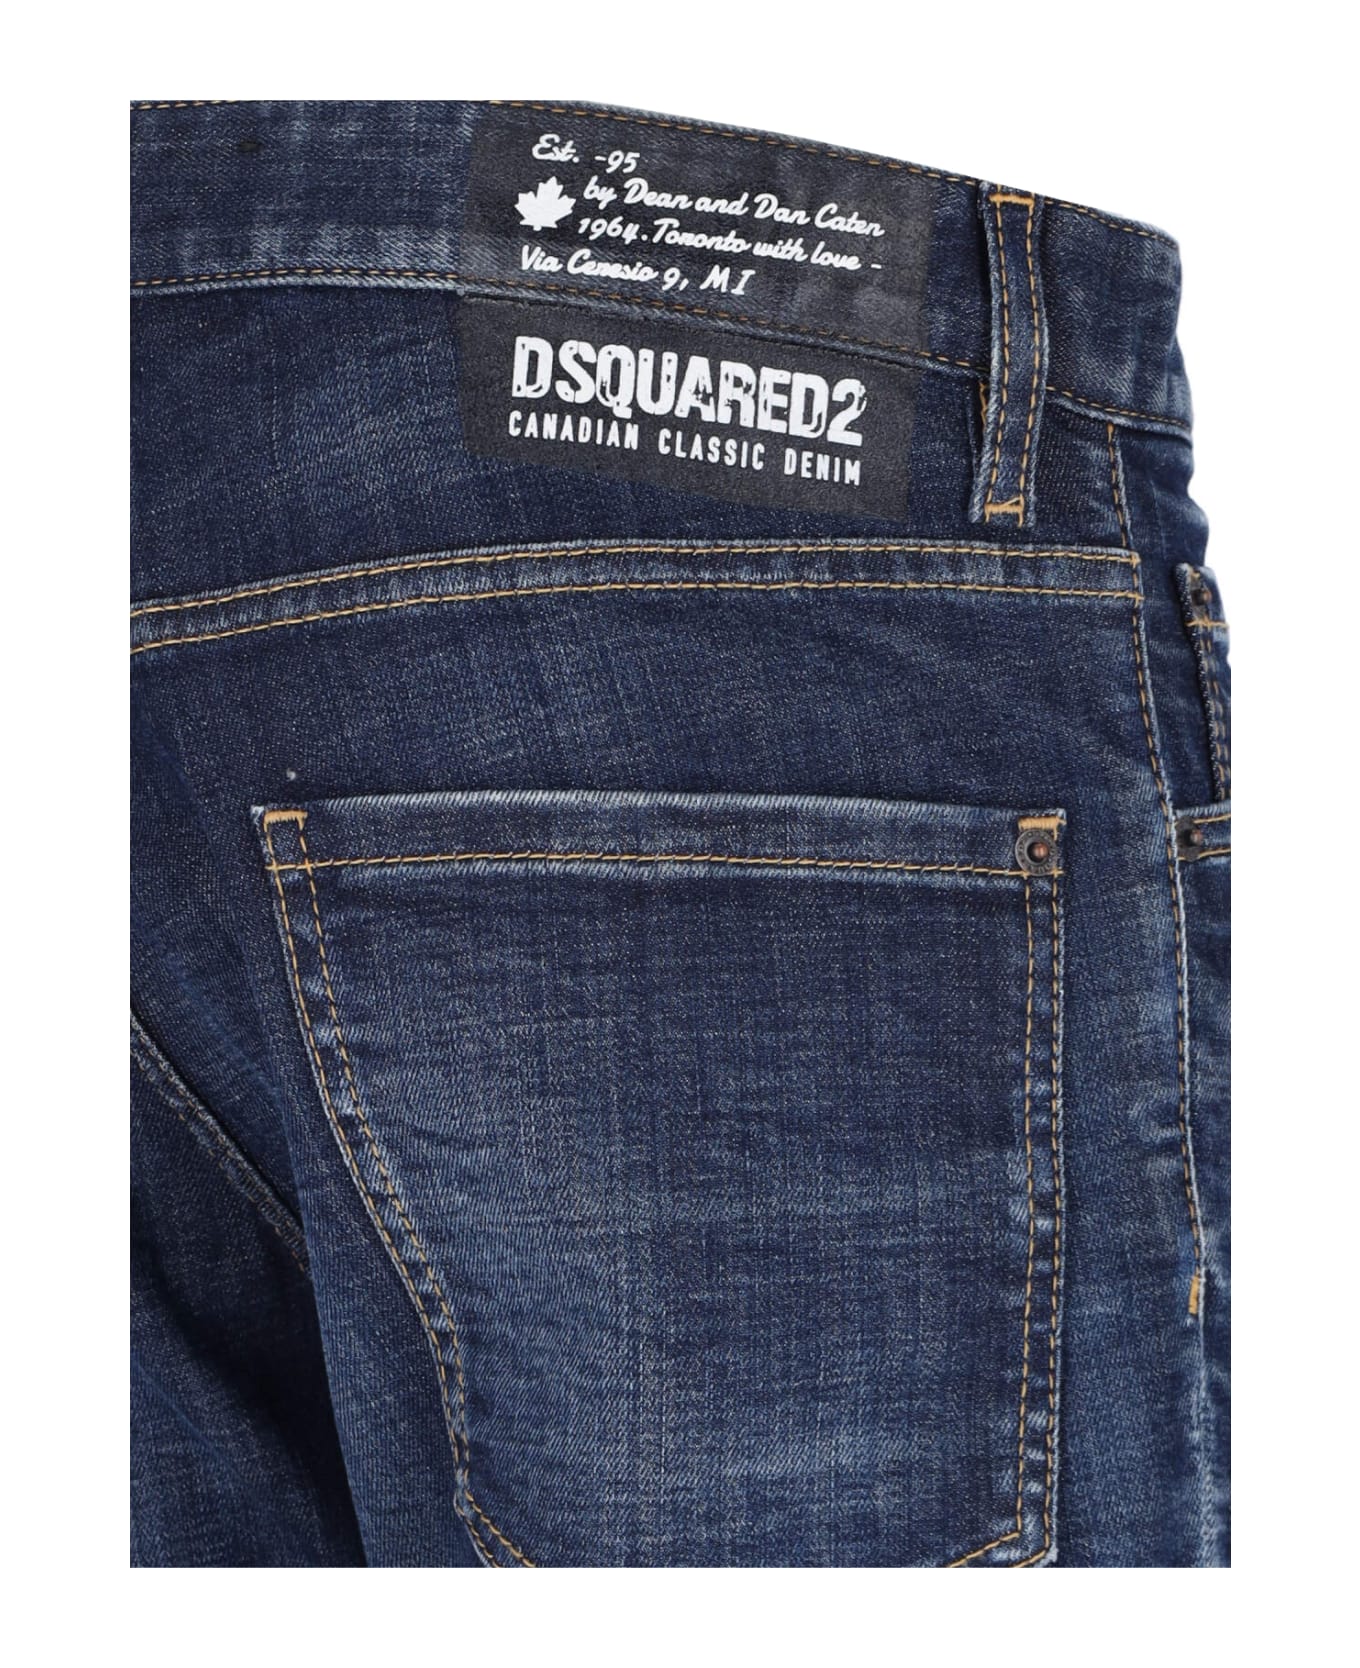 Dsquared2 'canadian Classic' Jeans - Blue